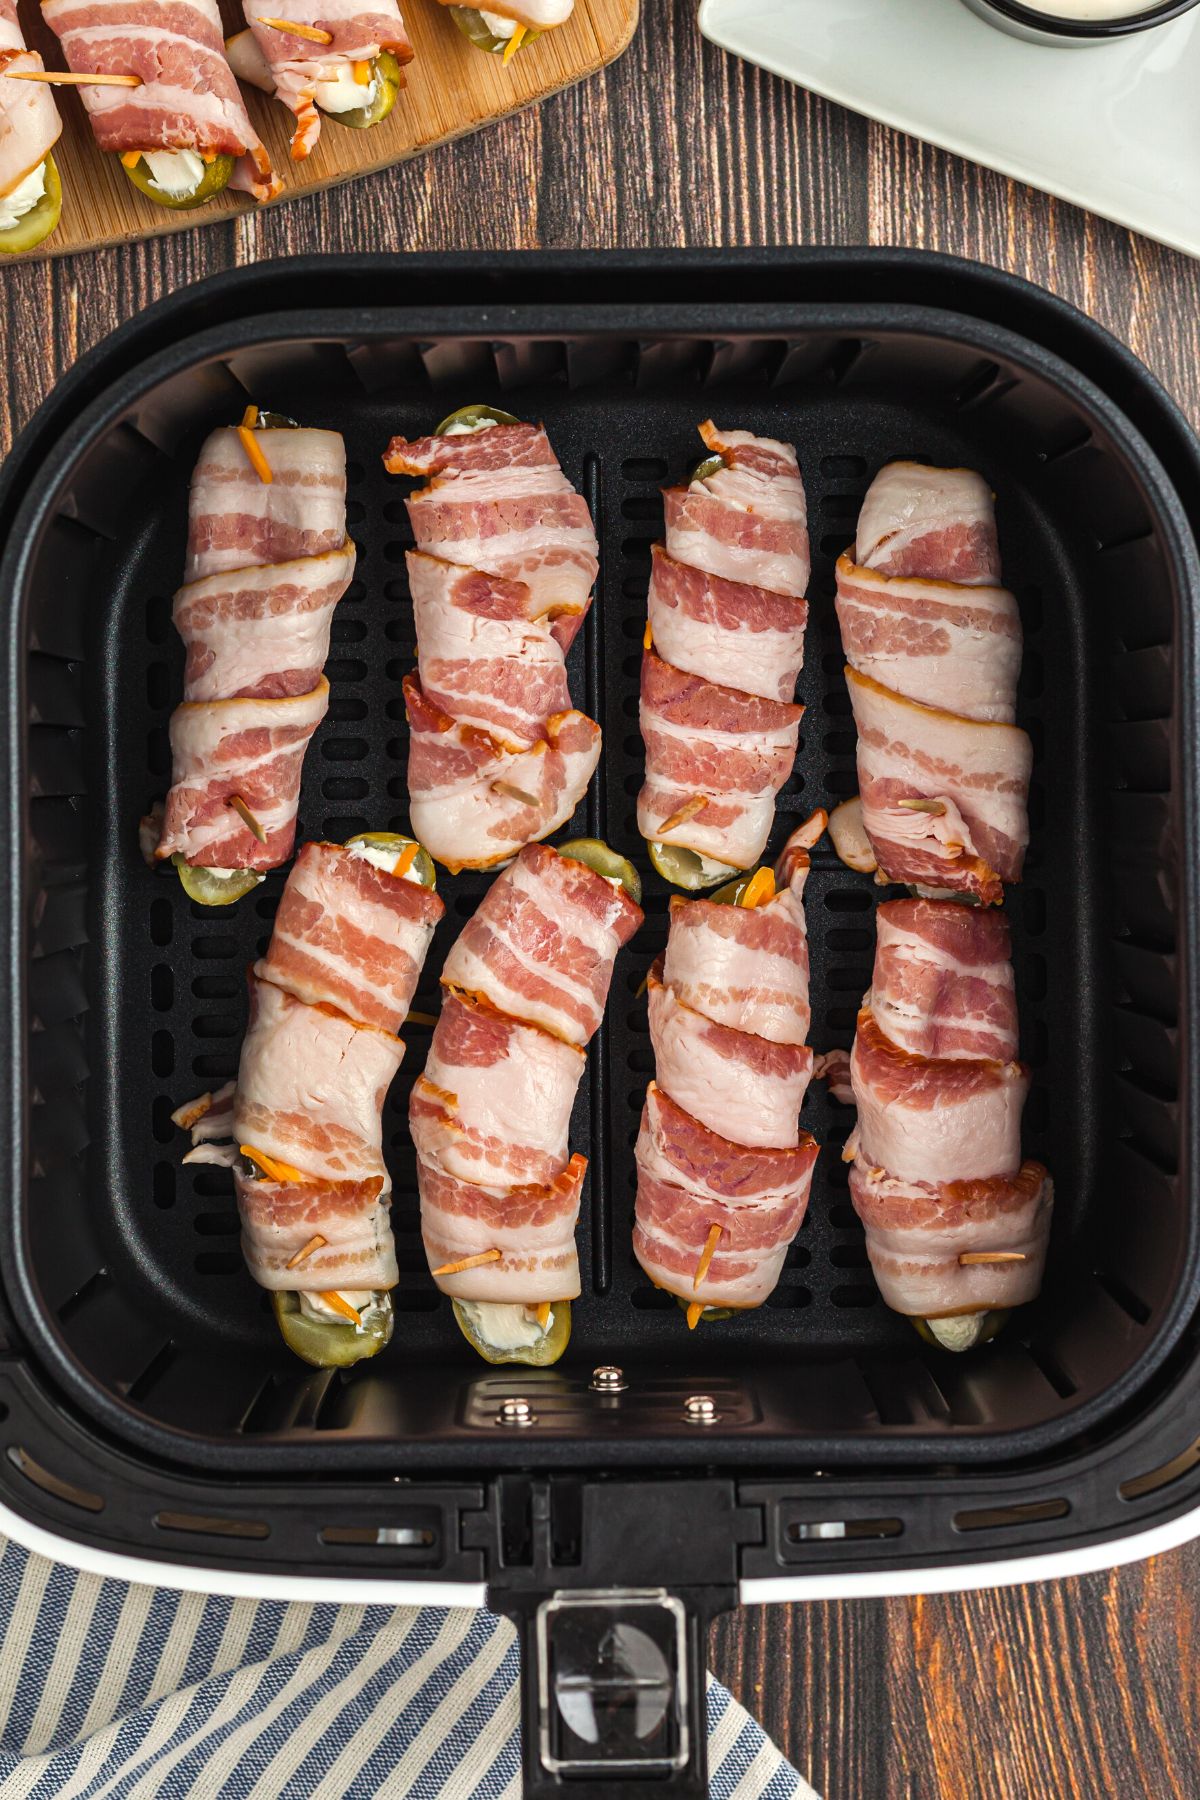 Bacon wrapped stuffed pickles in the air fryer basket before being cooked